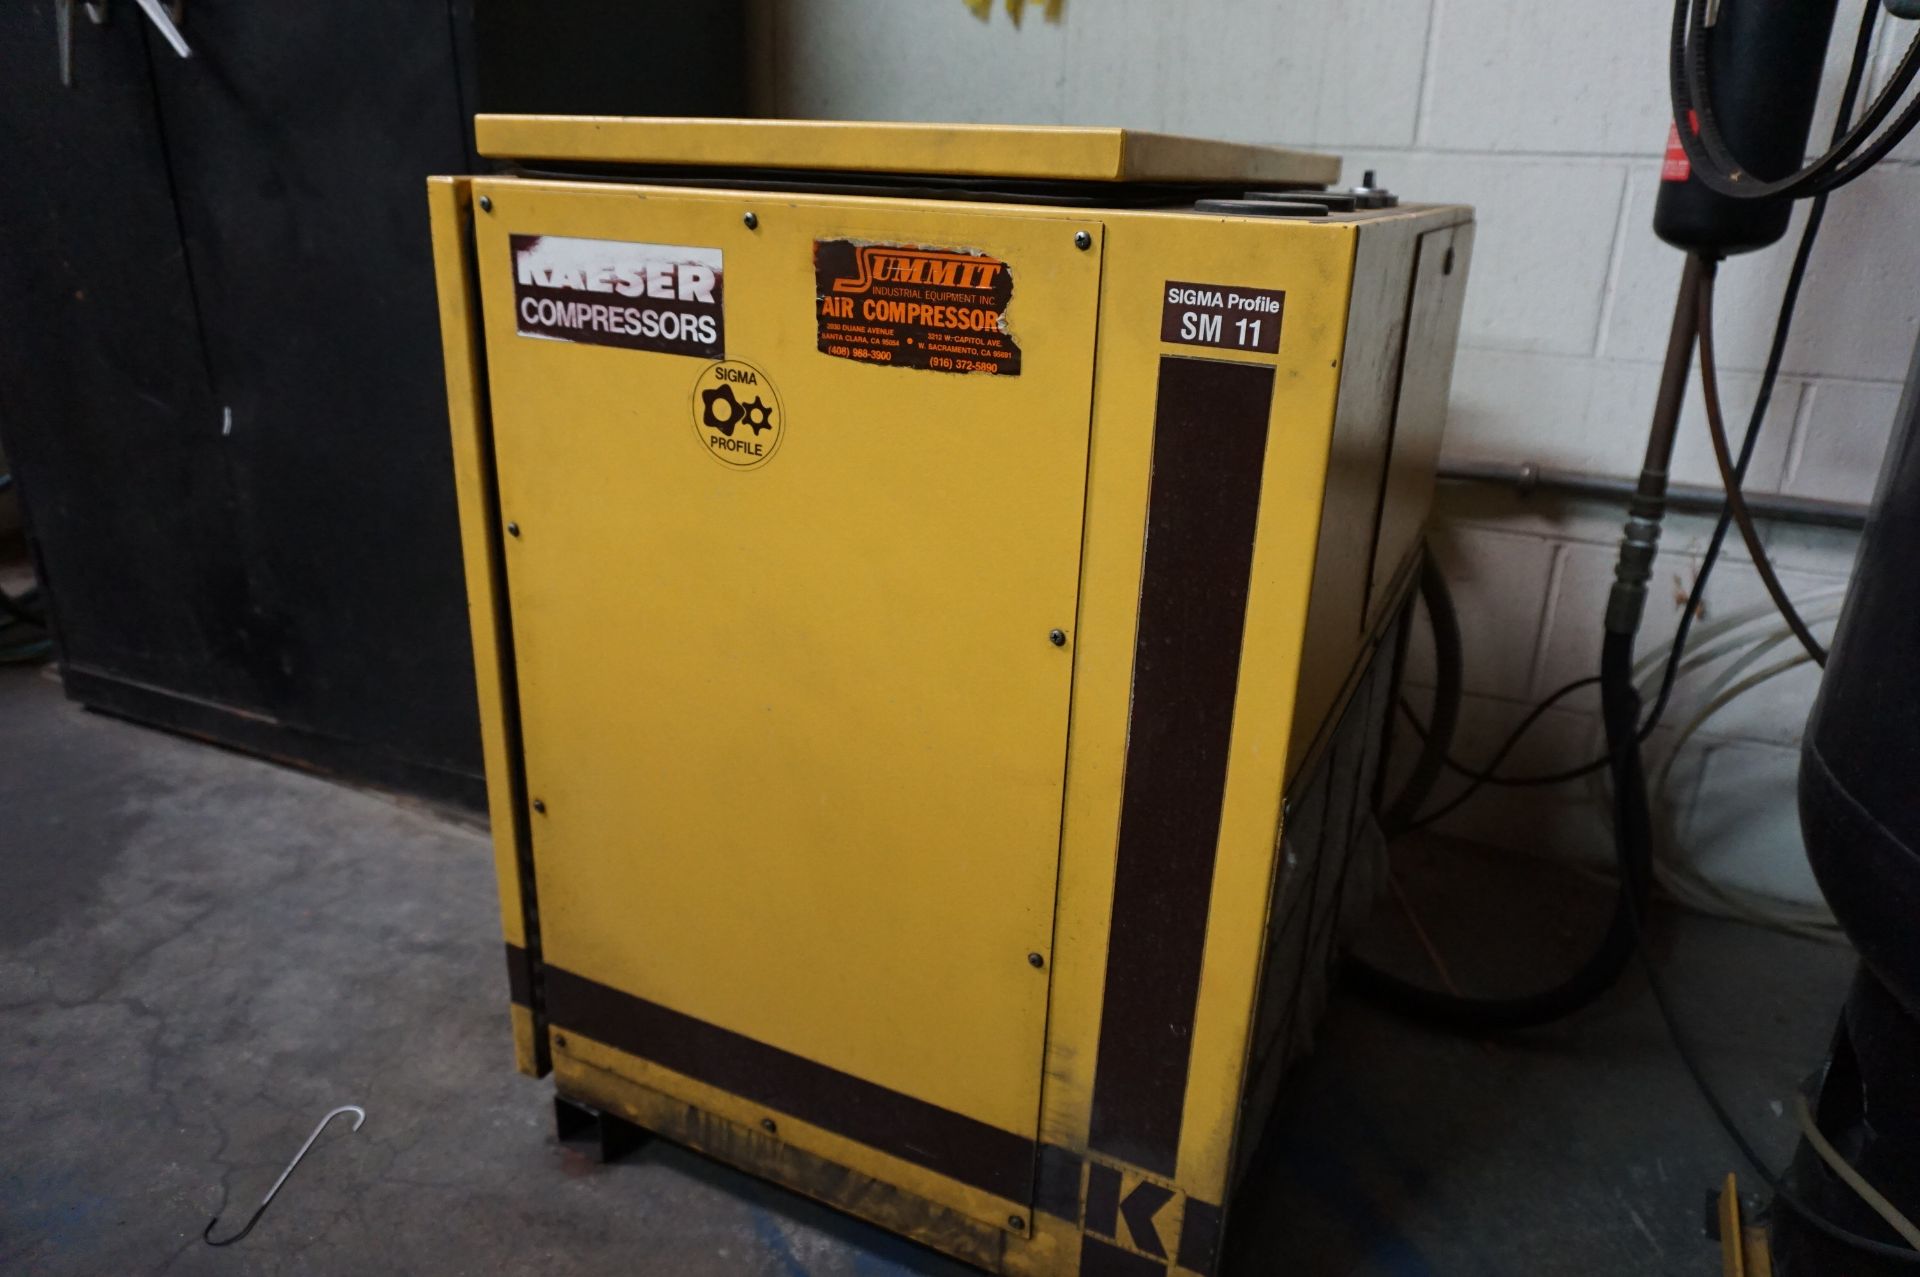 AIR COMPRESSOR LOT FOR POWDER COATING ROOM TO INCLUDE: (1) HAESER KRD050 AIR COMPRESSOR, AIR TANK, - Image 5 of 6